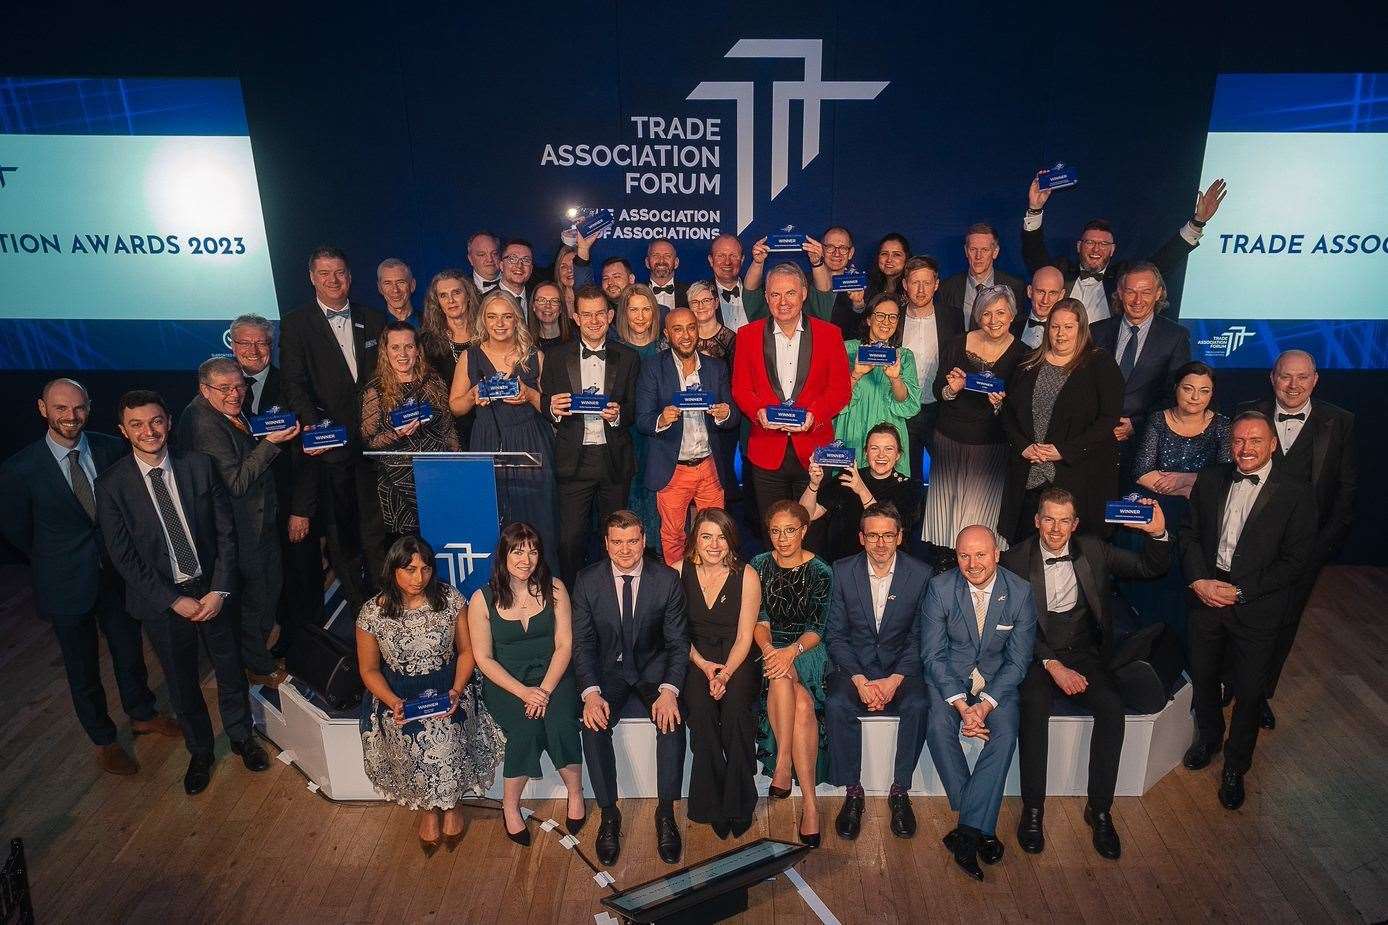 All the winners at the Trade Association Forum awards at The Brewery in central London